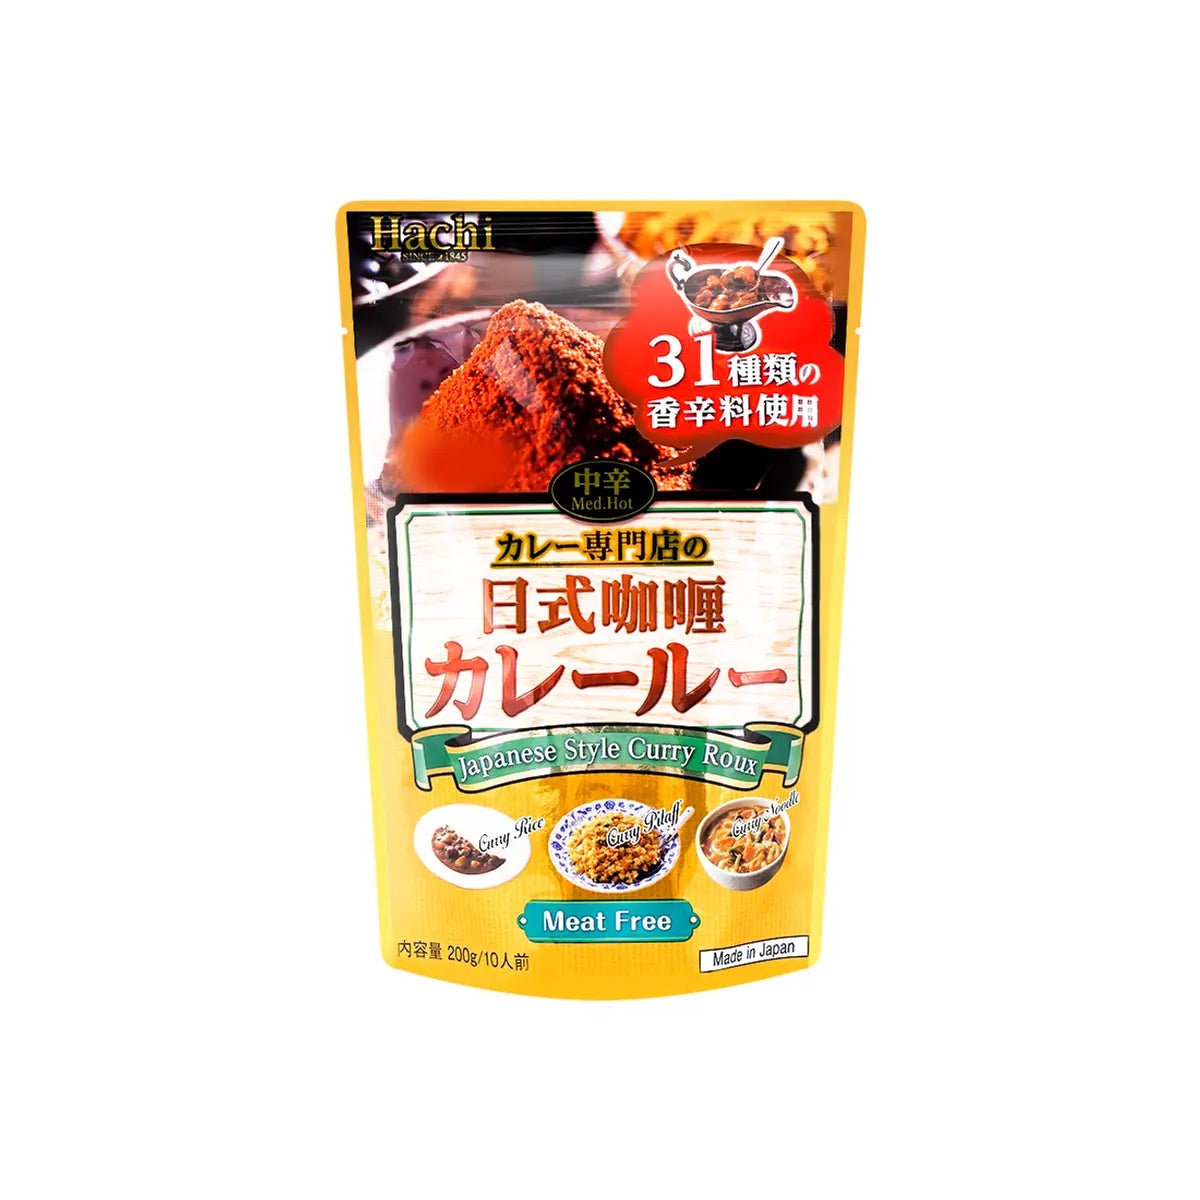 Hachi Japanese Style Curry Roux (Med. Hot) - 200g/7oz